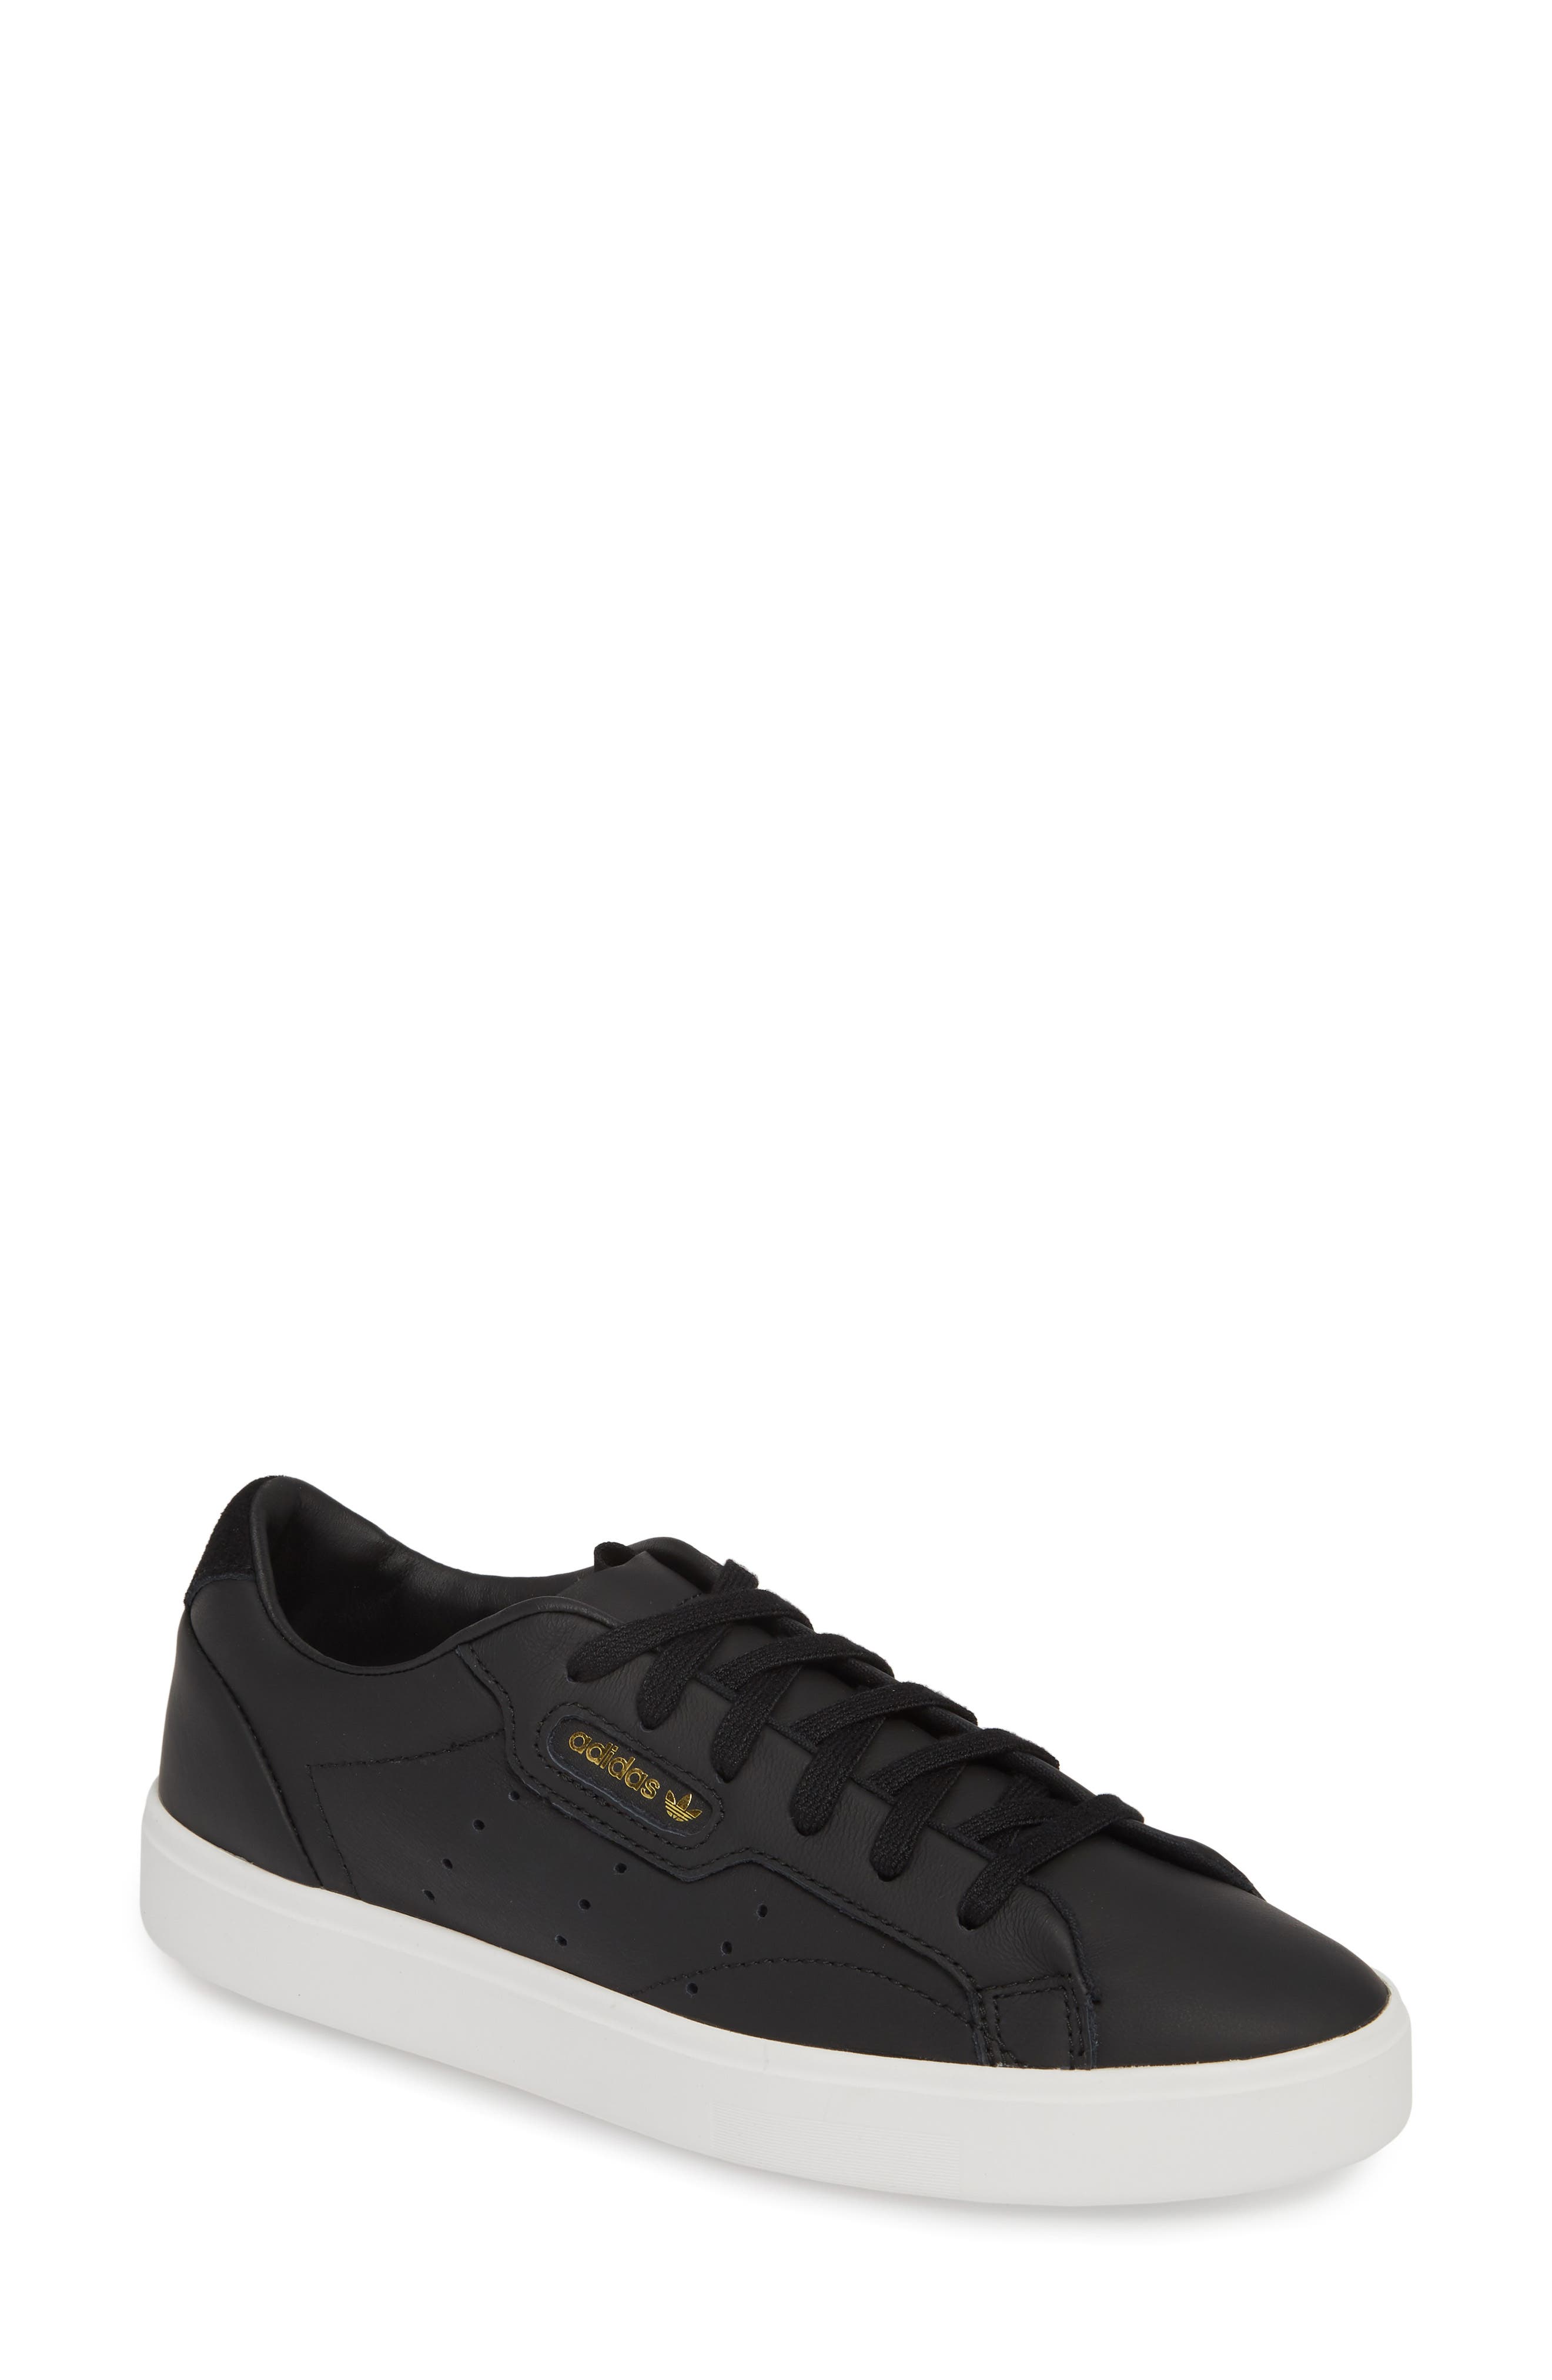 adidas black leather shoes womens